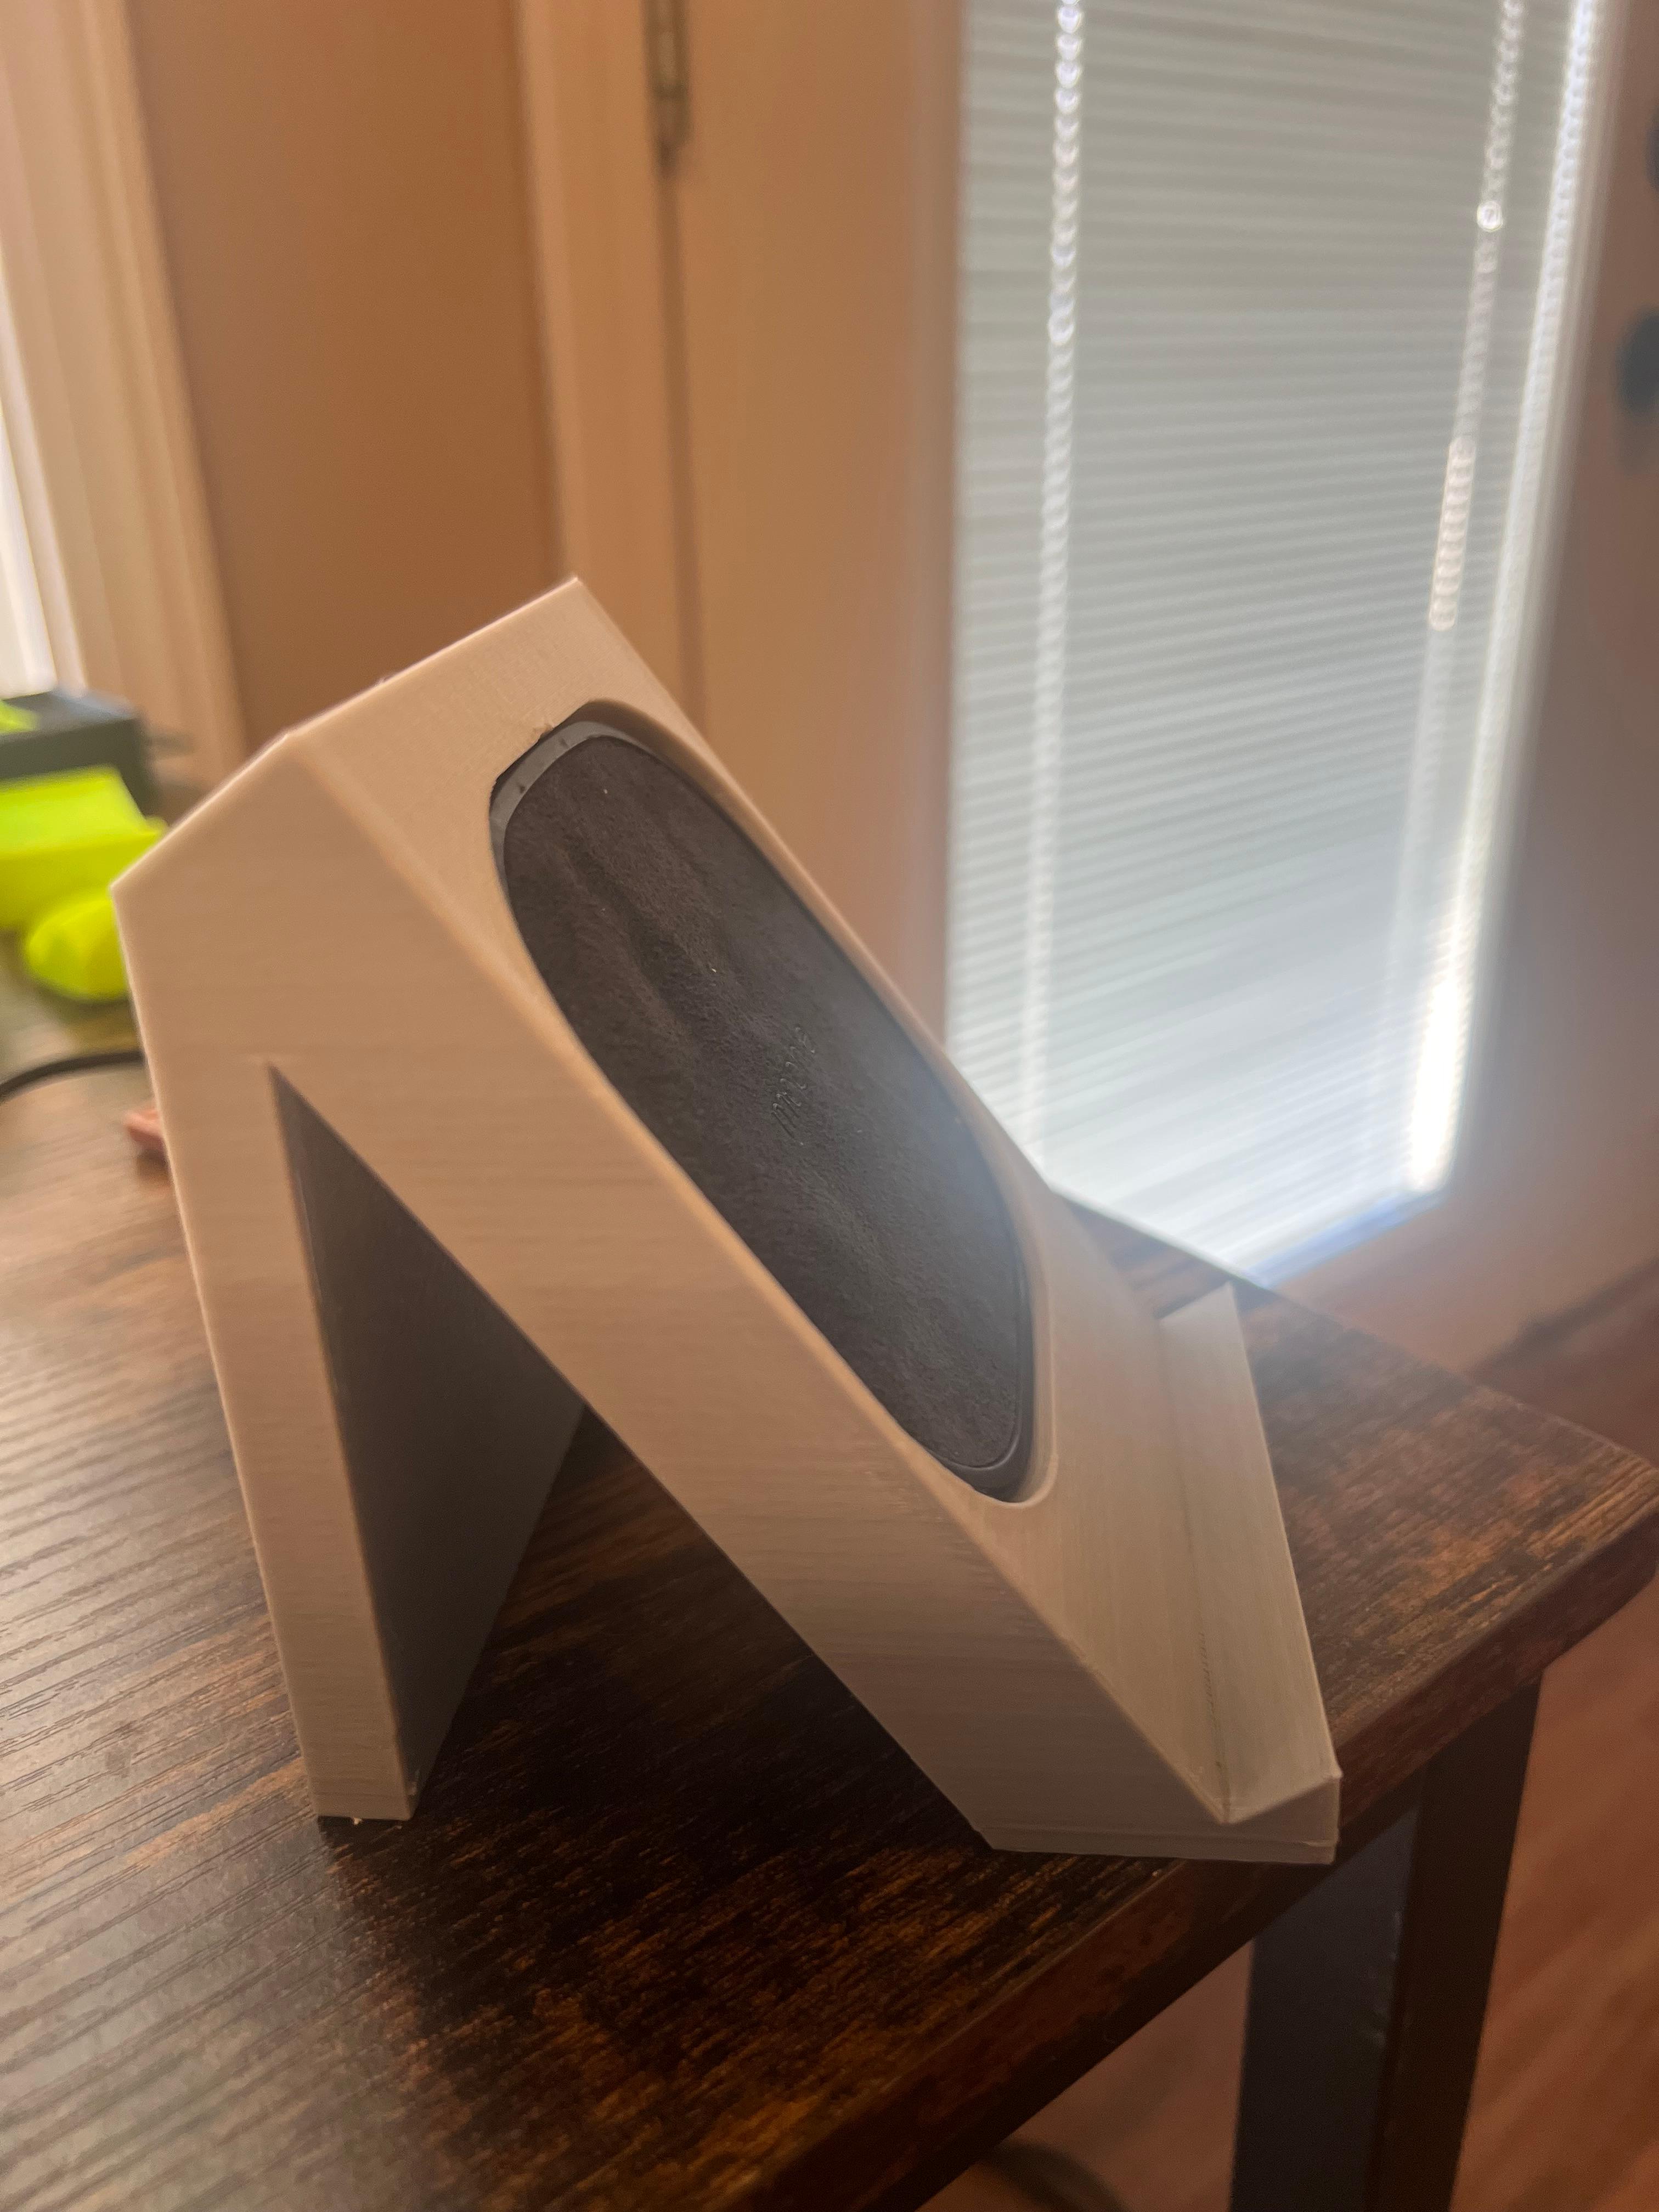 mophie stand  3d model